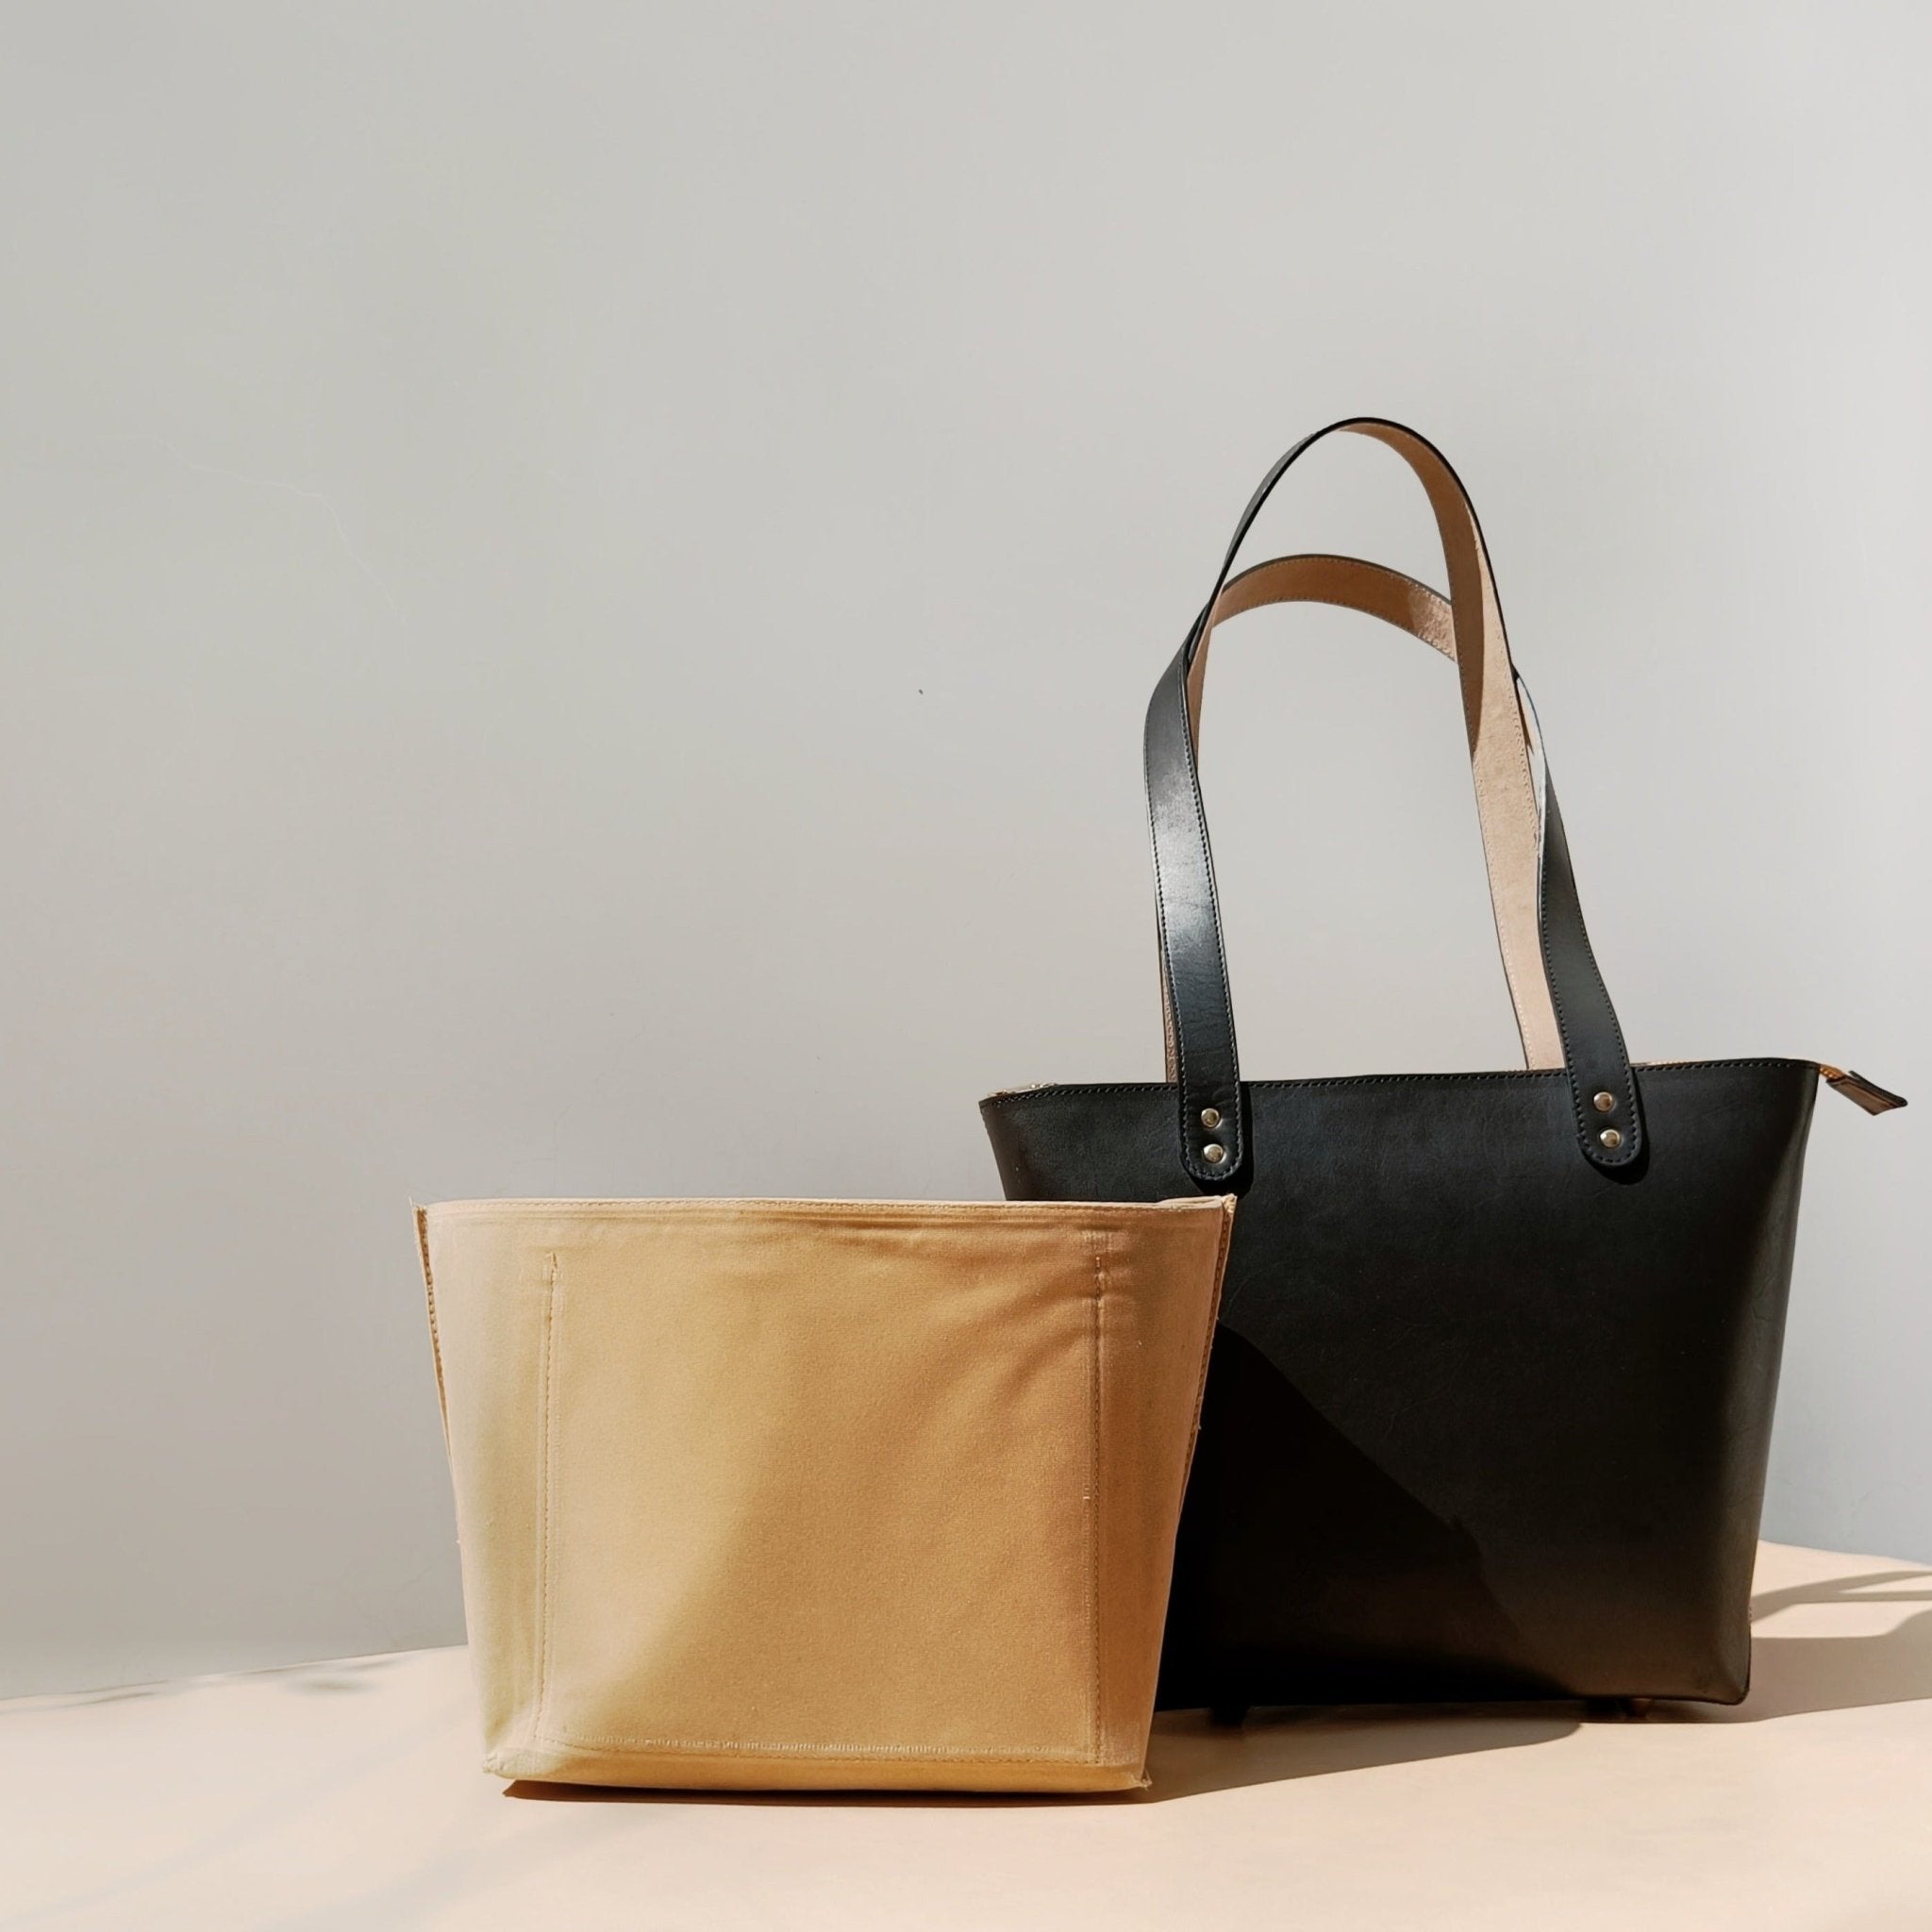 Timeless And Classic, These Black Leather Totes Are Perfect For Everyday | Black  leather tote, Black leather tote bag, Tote bag leather